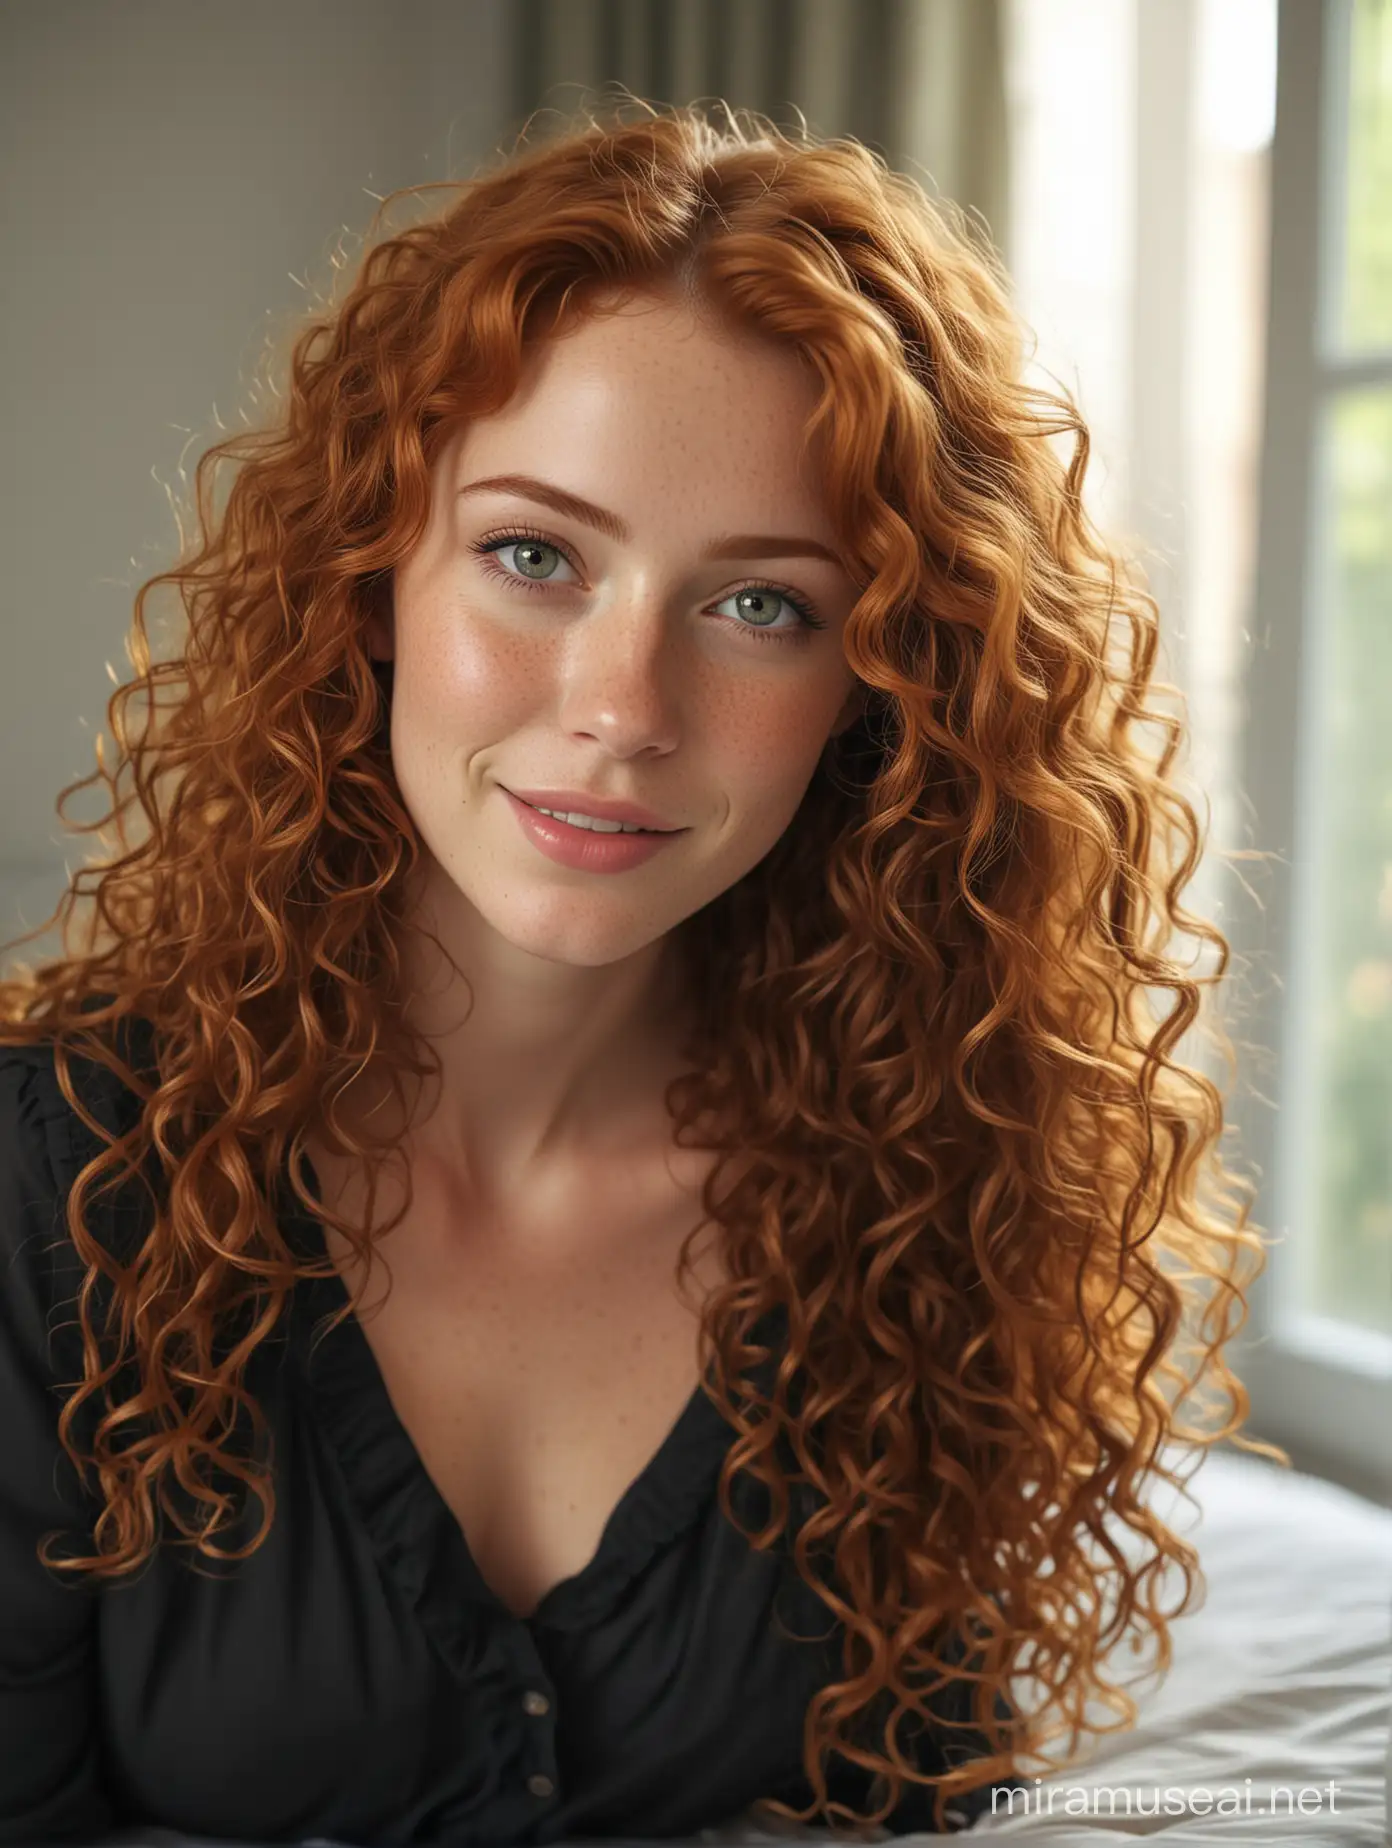 Beautiful Woman with Long Curly Ginger Hair Sitting in Sunlit Bedroom